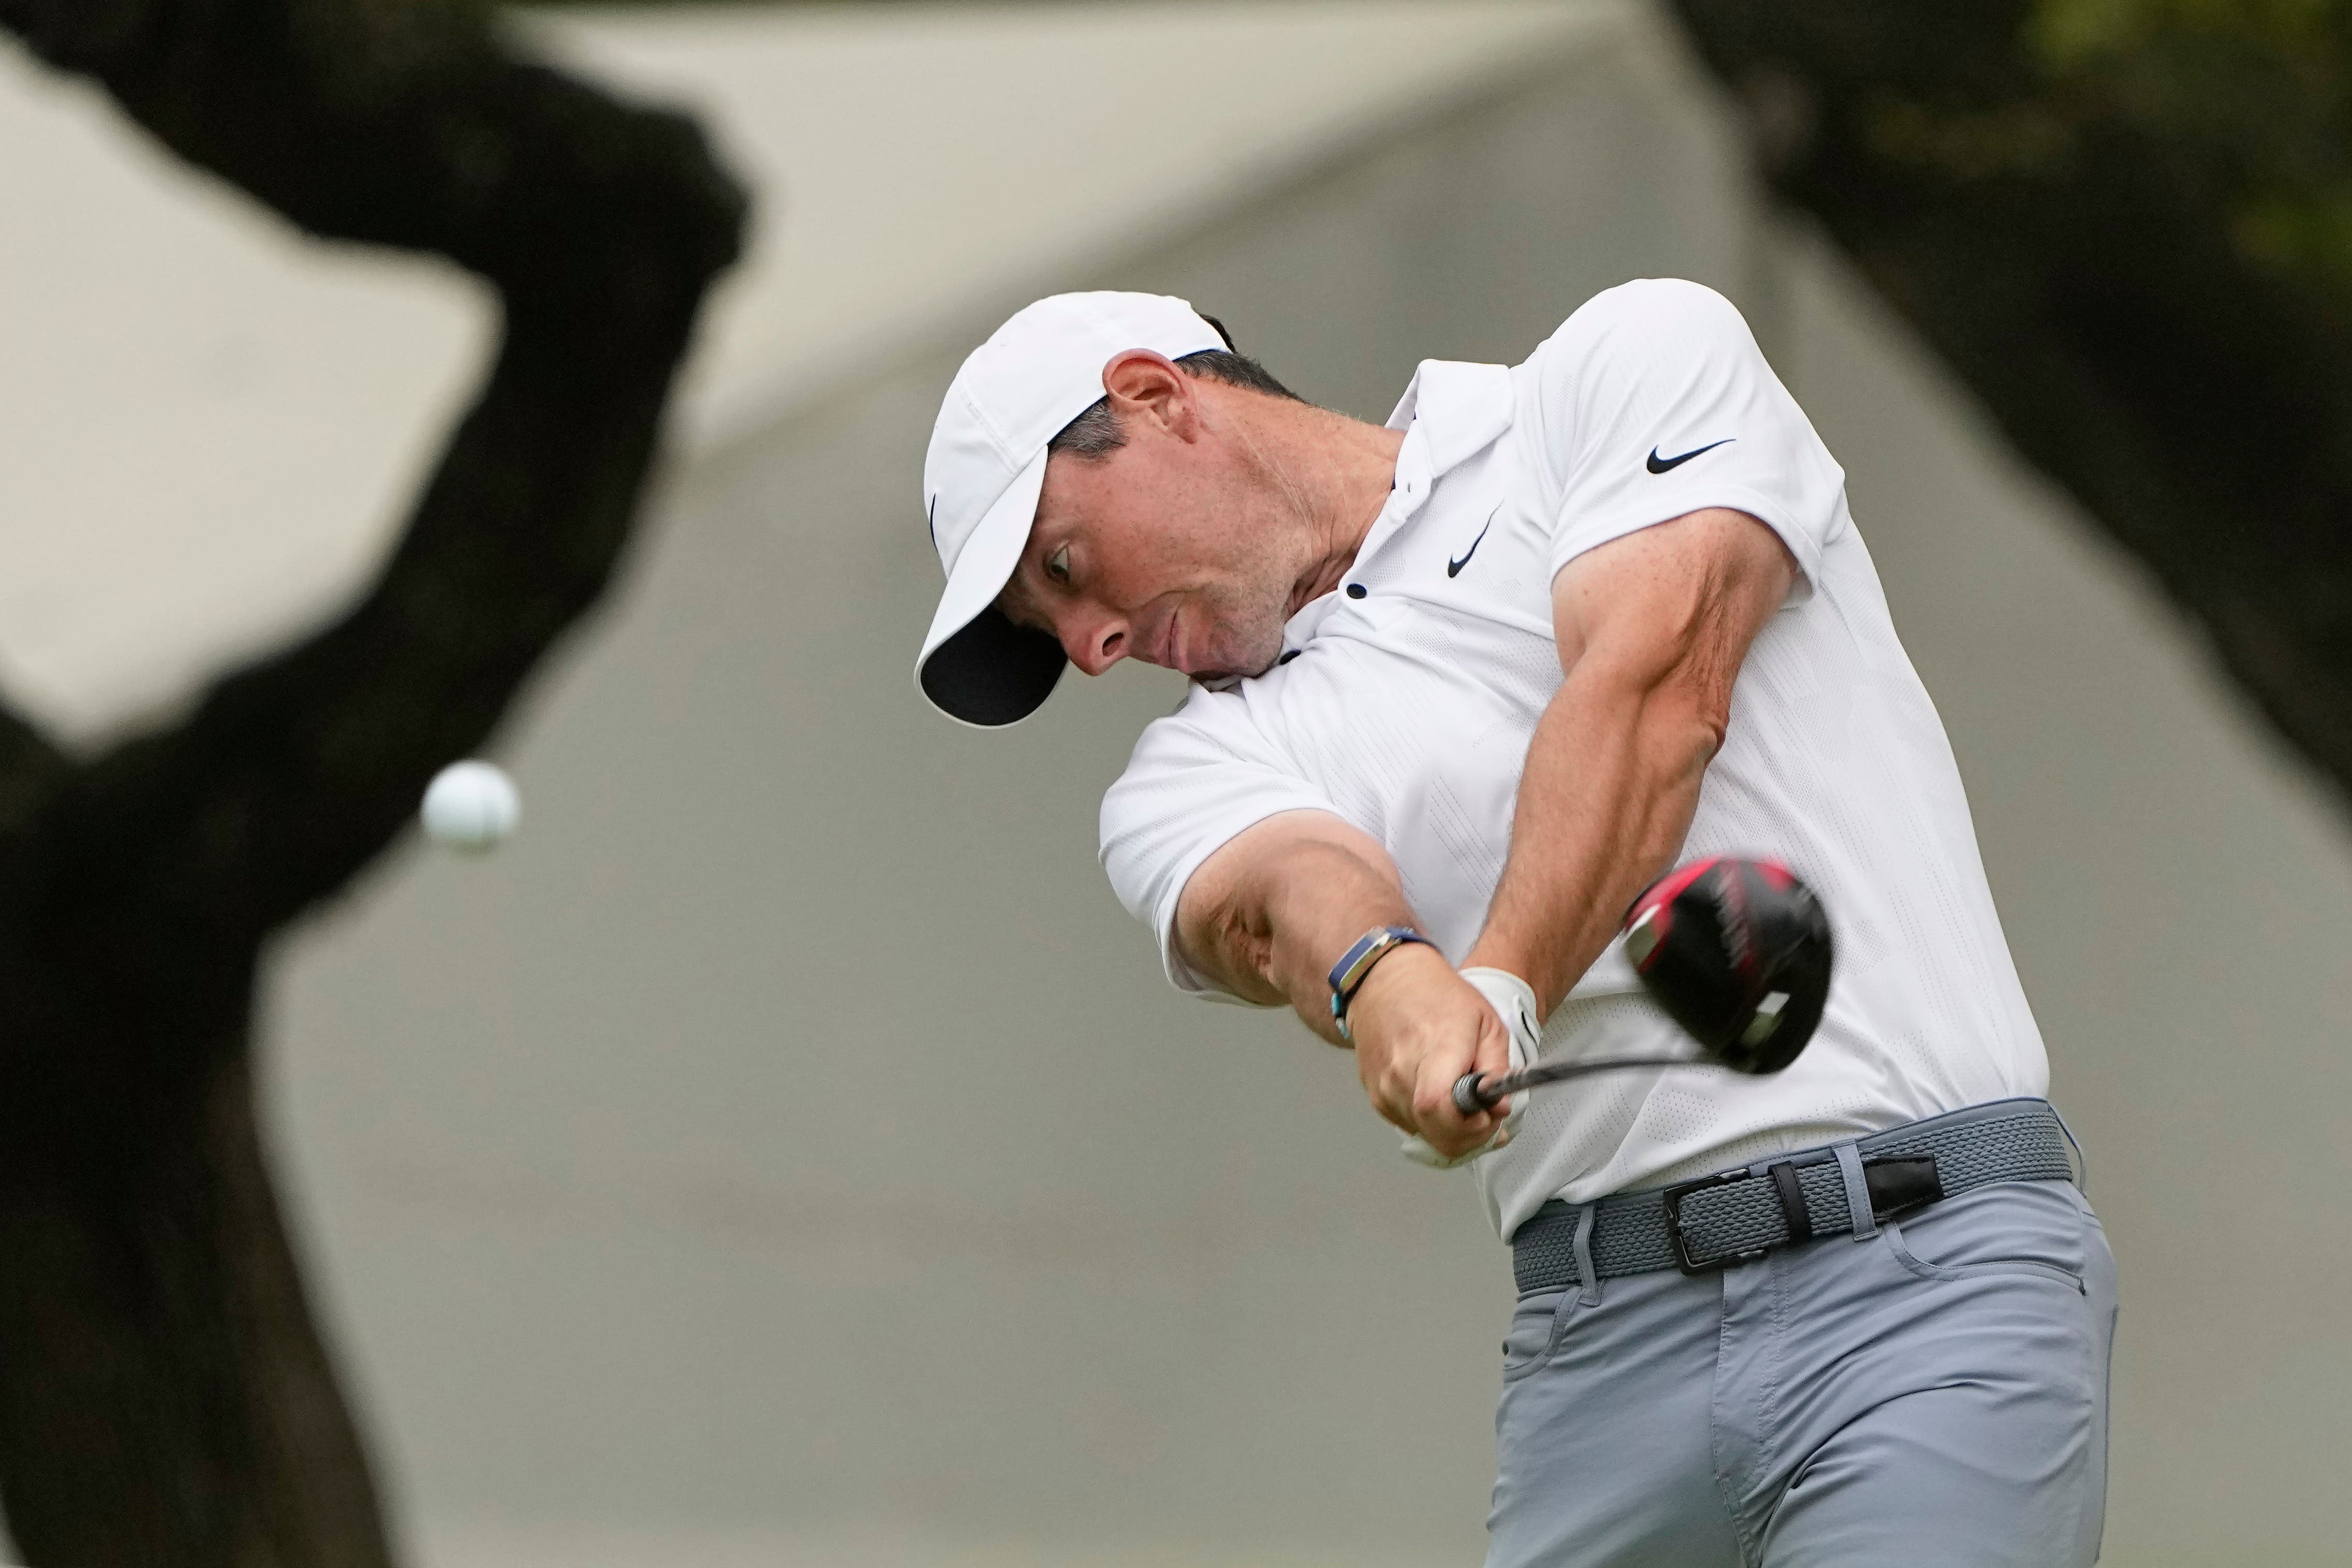 Rory McIlroy’s driver will be key to success at The Masters